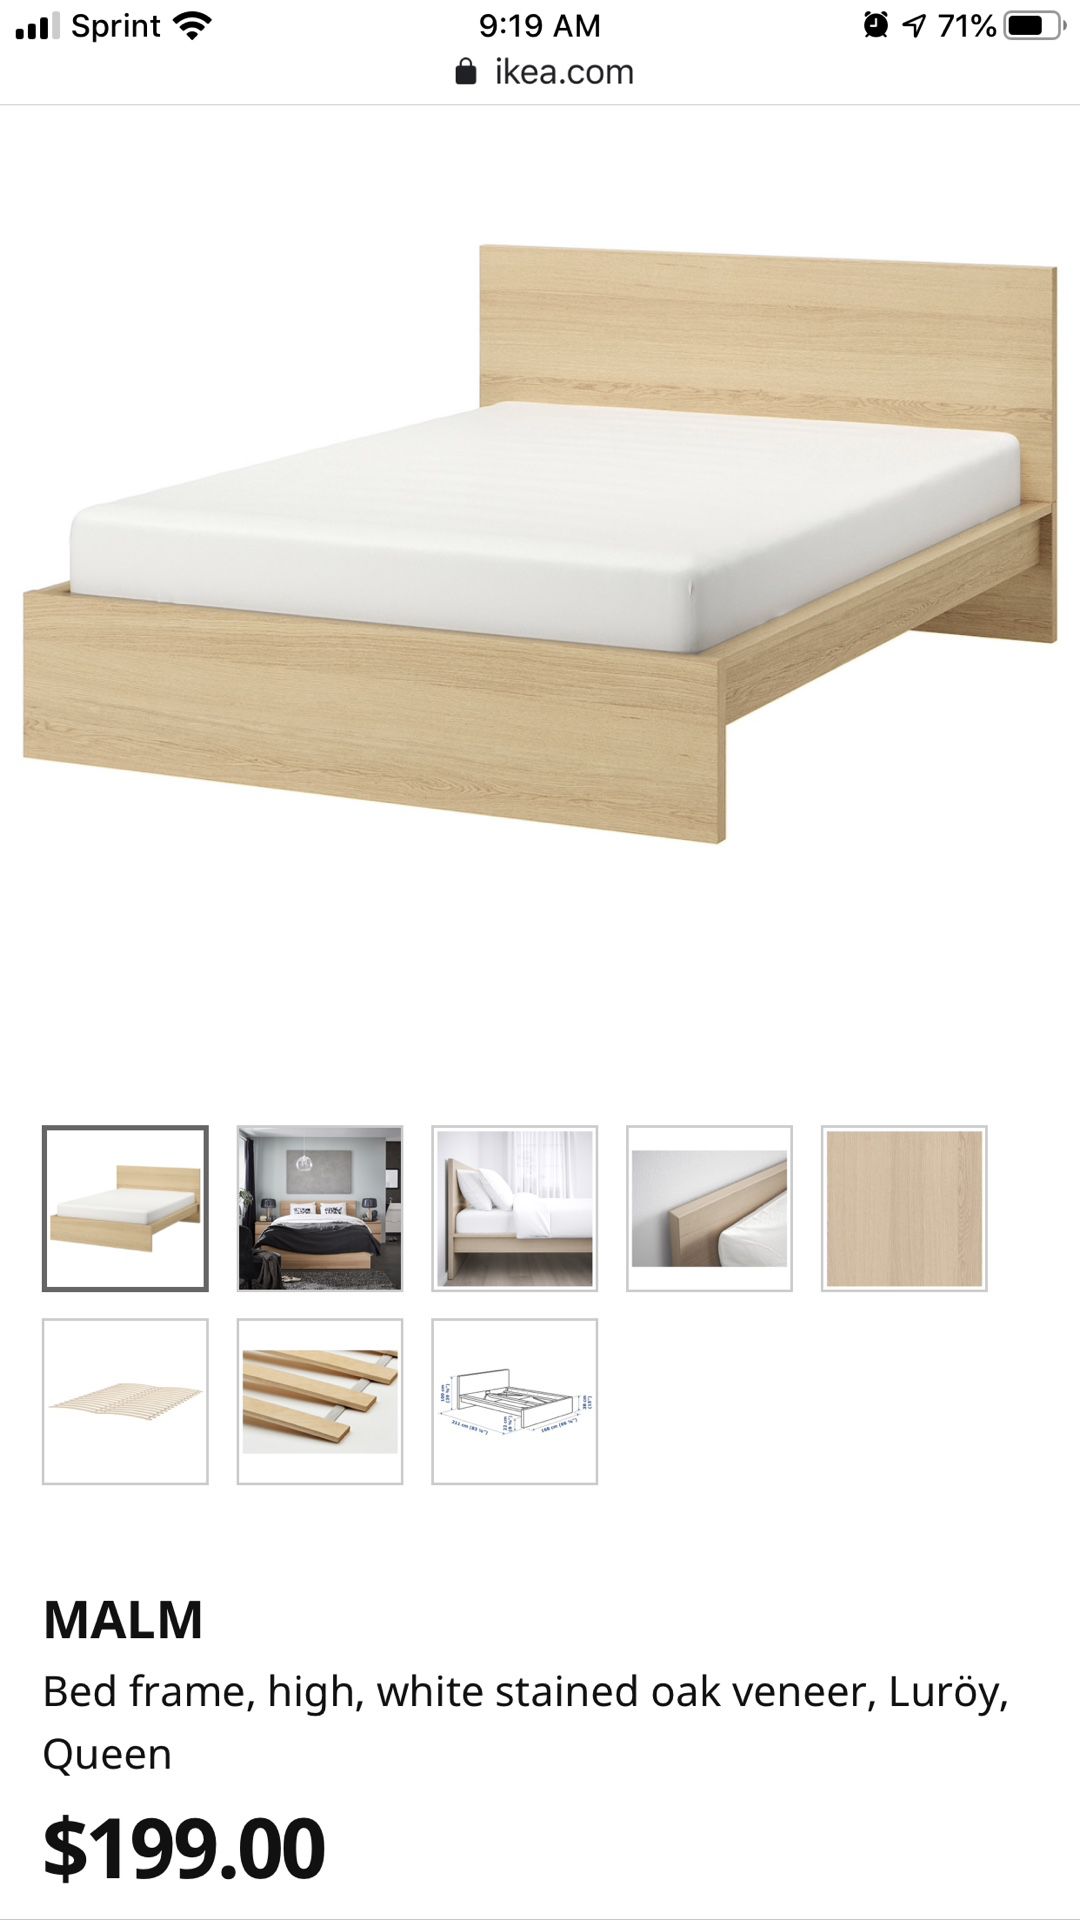 Malm IKEA bed frame - Queen